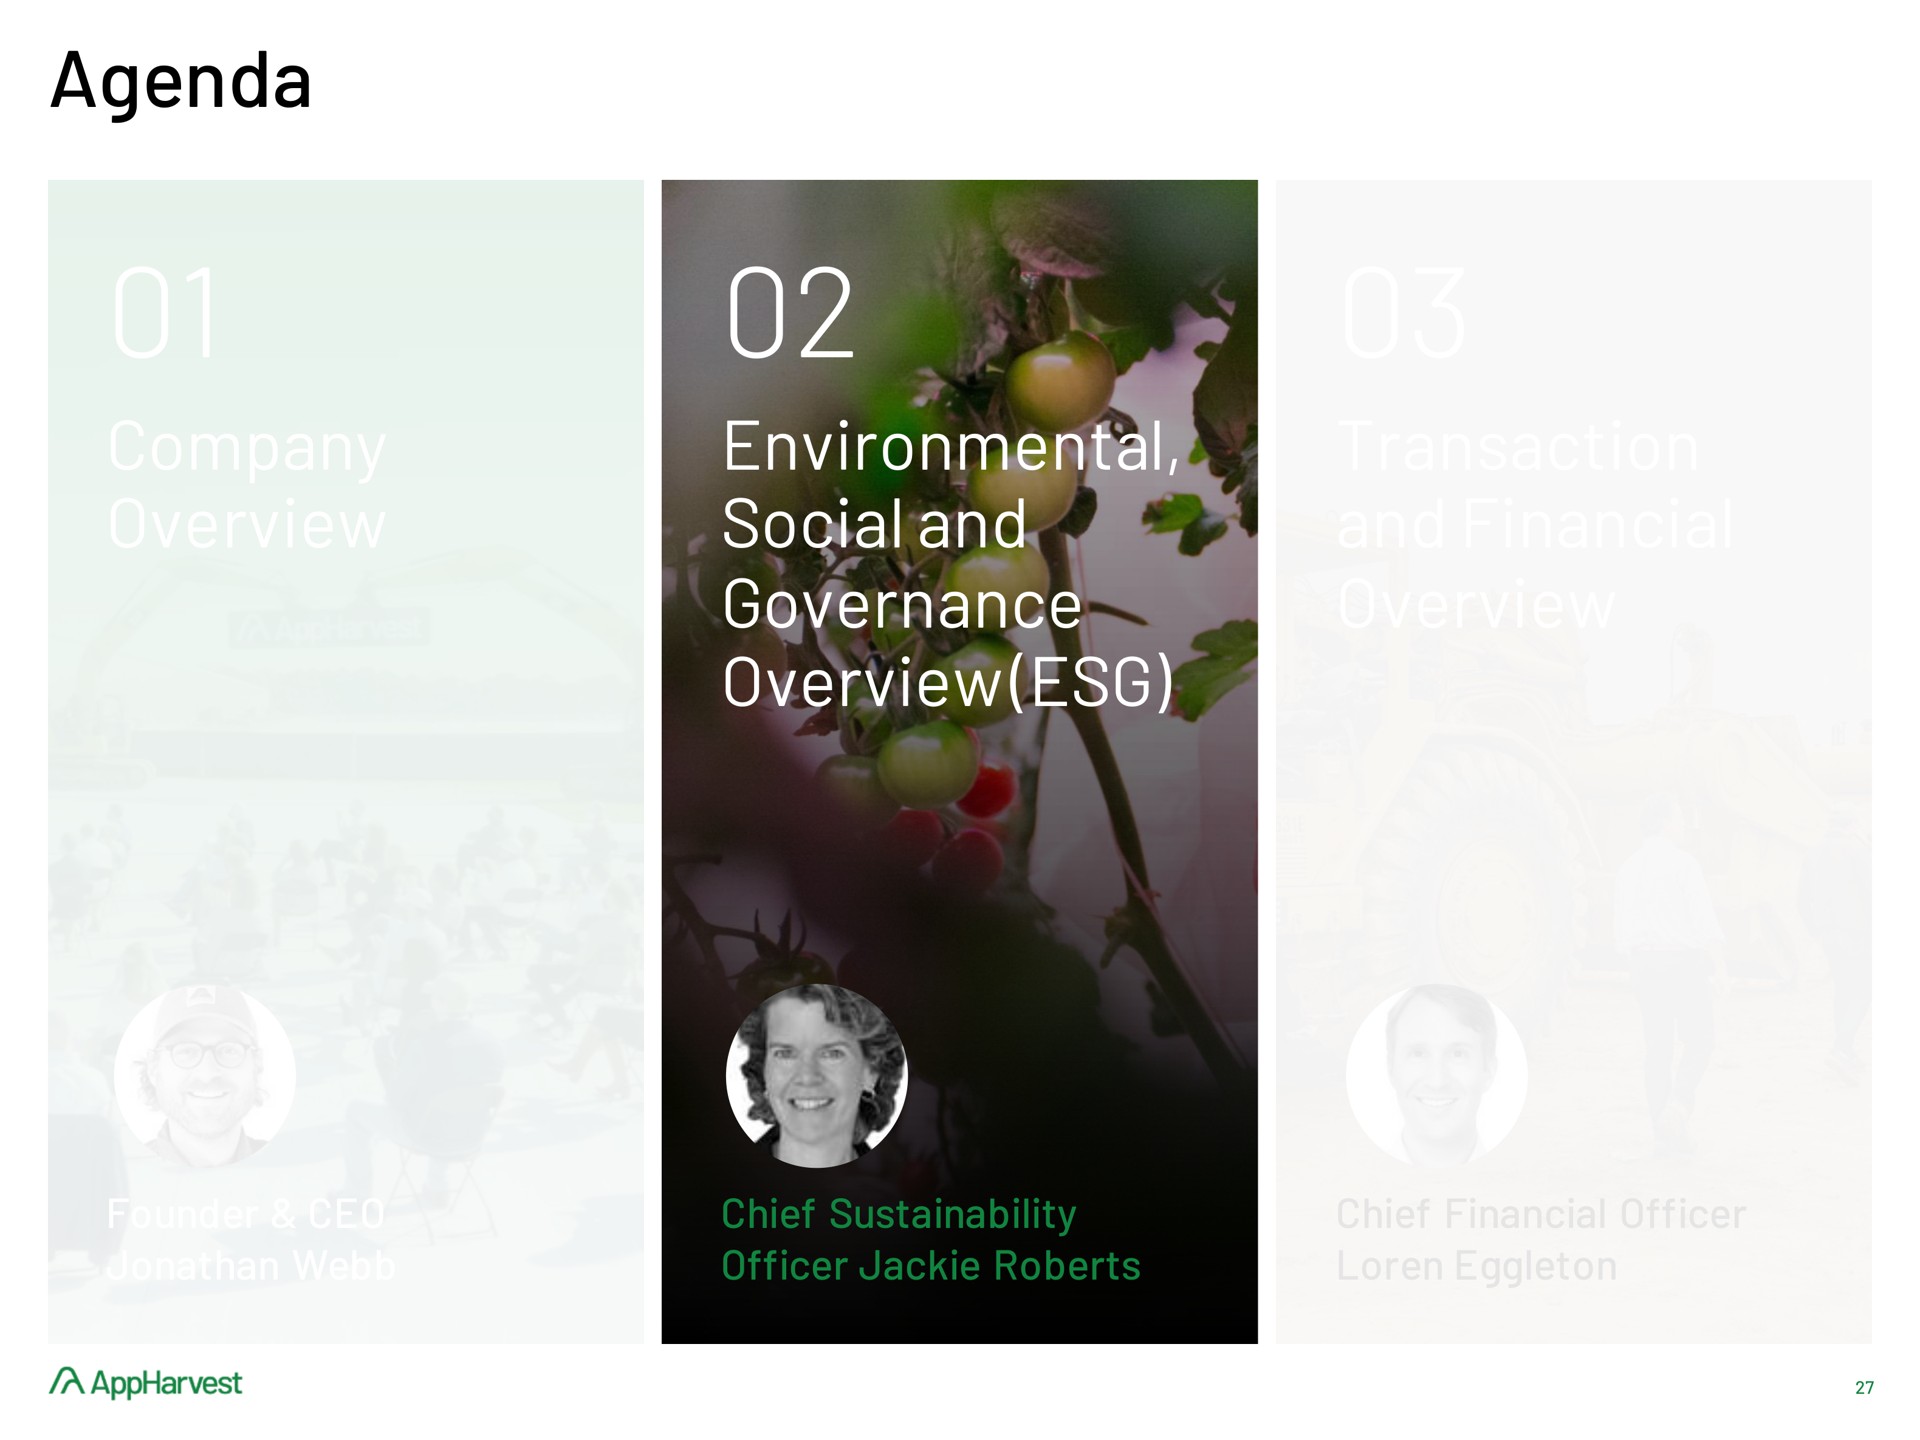 agenda company overview environmental social and governance overview transaction and financial overview | AppHarvest